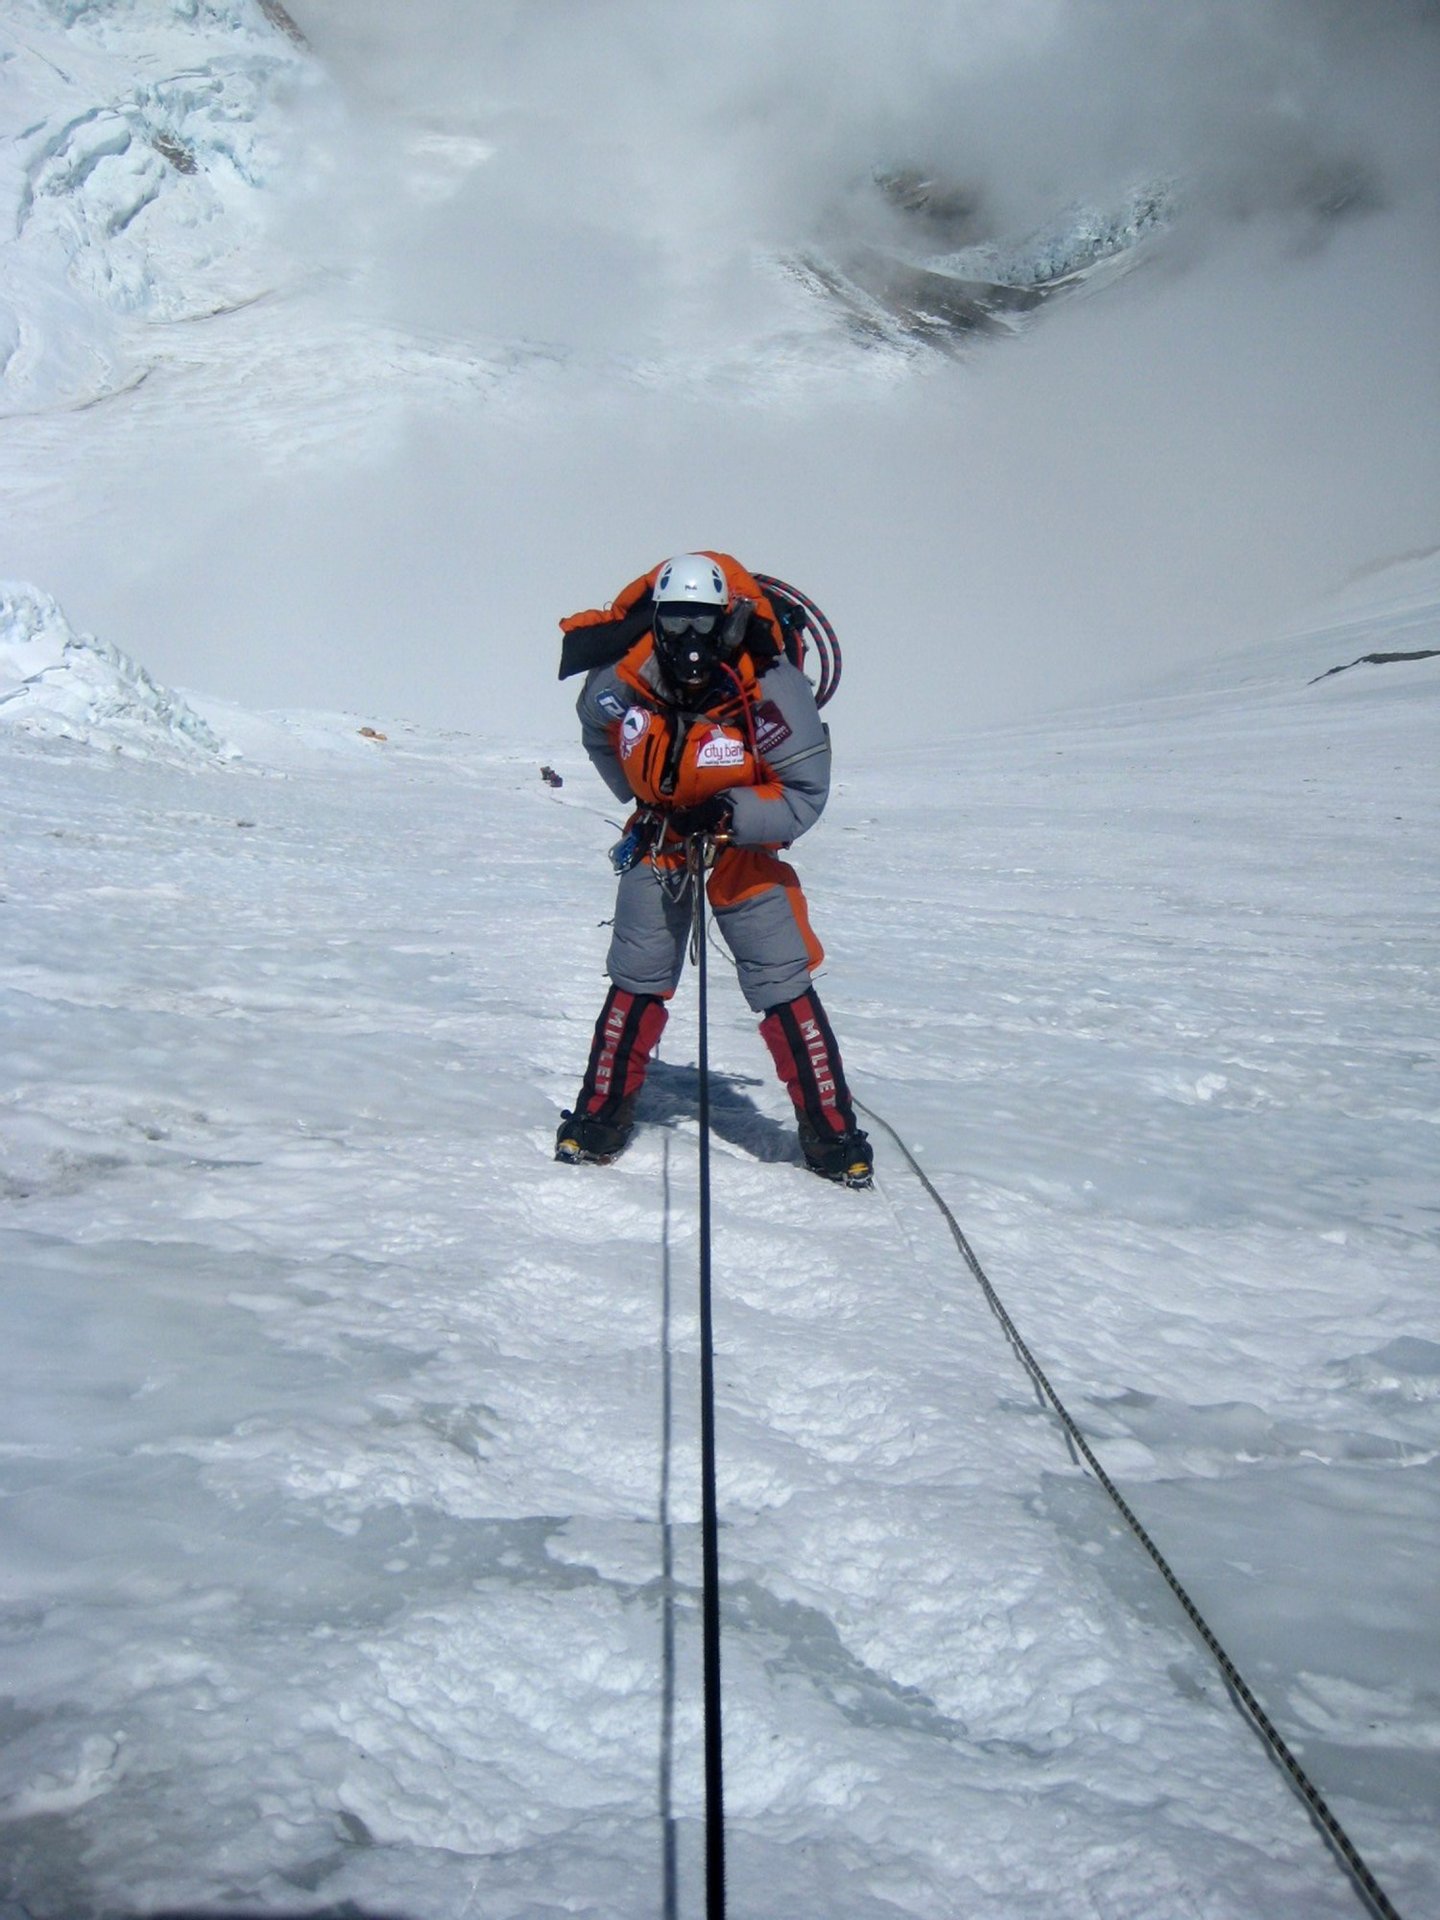 Female Bangladeshi mountaineer Wasfia Nazreen descends on the lonely Lhotse face on Mount Everest on May 27, 2012. Wasfia Nazreen, 29, became the second Bangladeshi woman to summit the world's tallest mountain on May 26, 2012 and is climbing the highest peak on each of the continents to celebrate 40 years of Bangladeshi independence. AFP PHOTO/ Ngima Girmen Sherpa (Photo credit should read Ngima Girmen Sherpa/AFP/GettyImages)